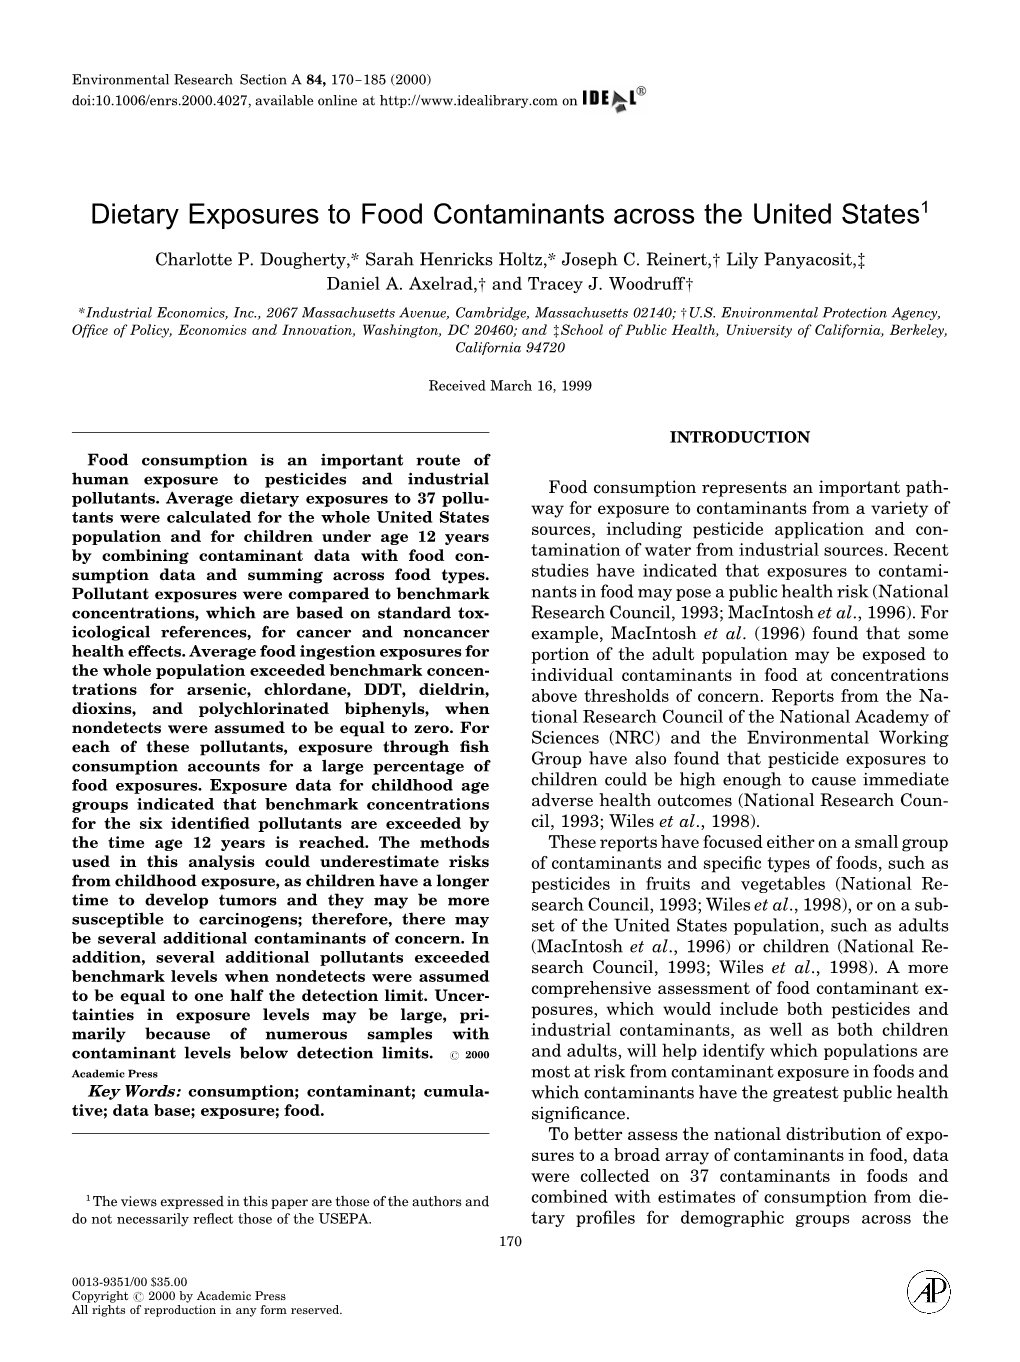 Dietary Exposures to Food Contaminants Across the United States1